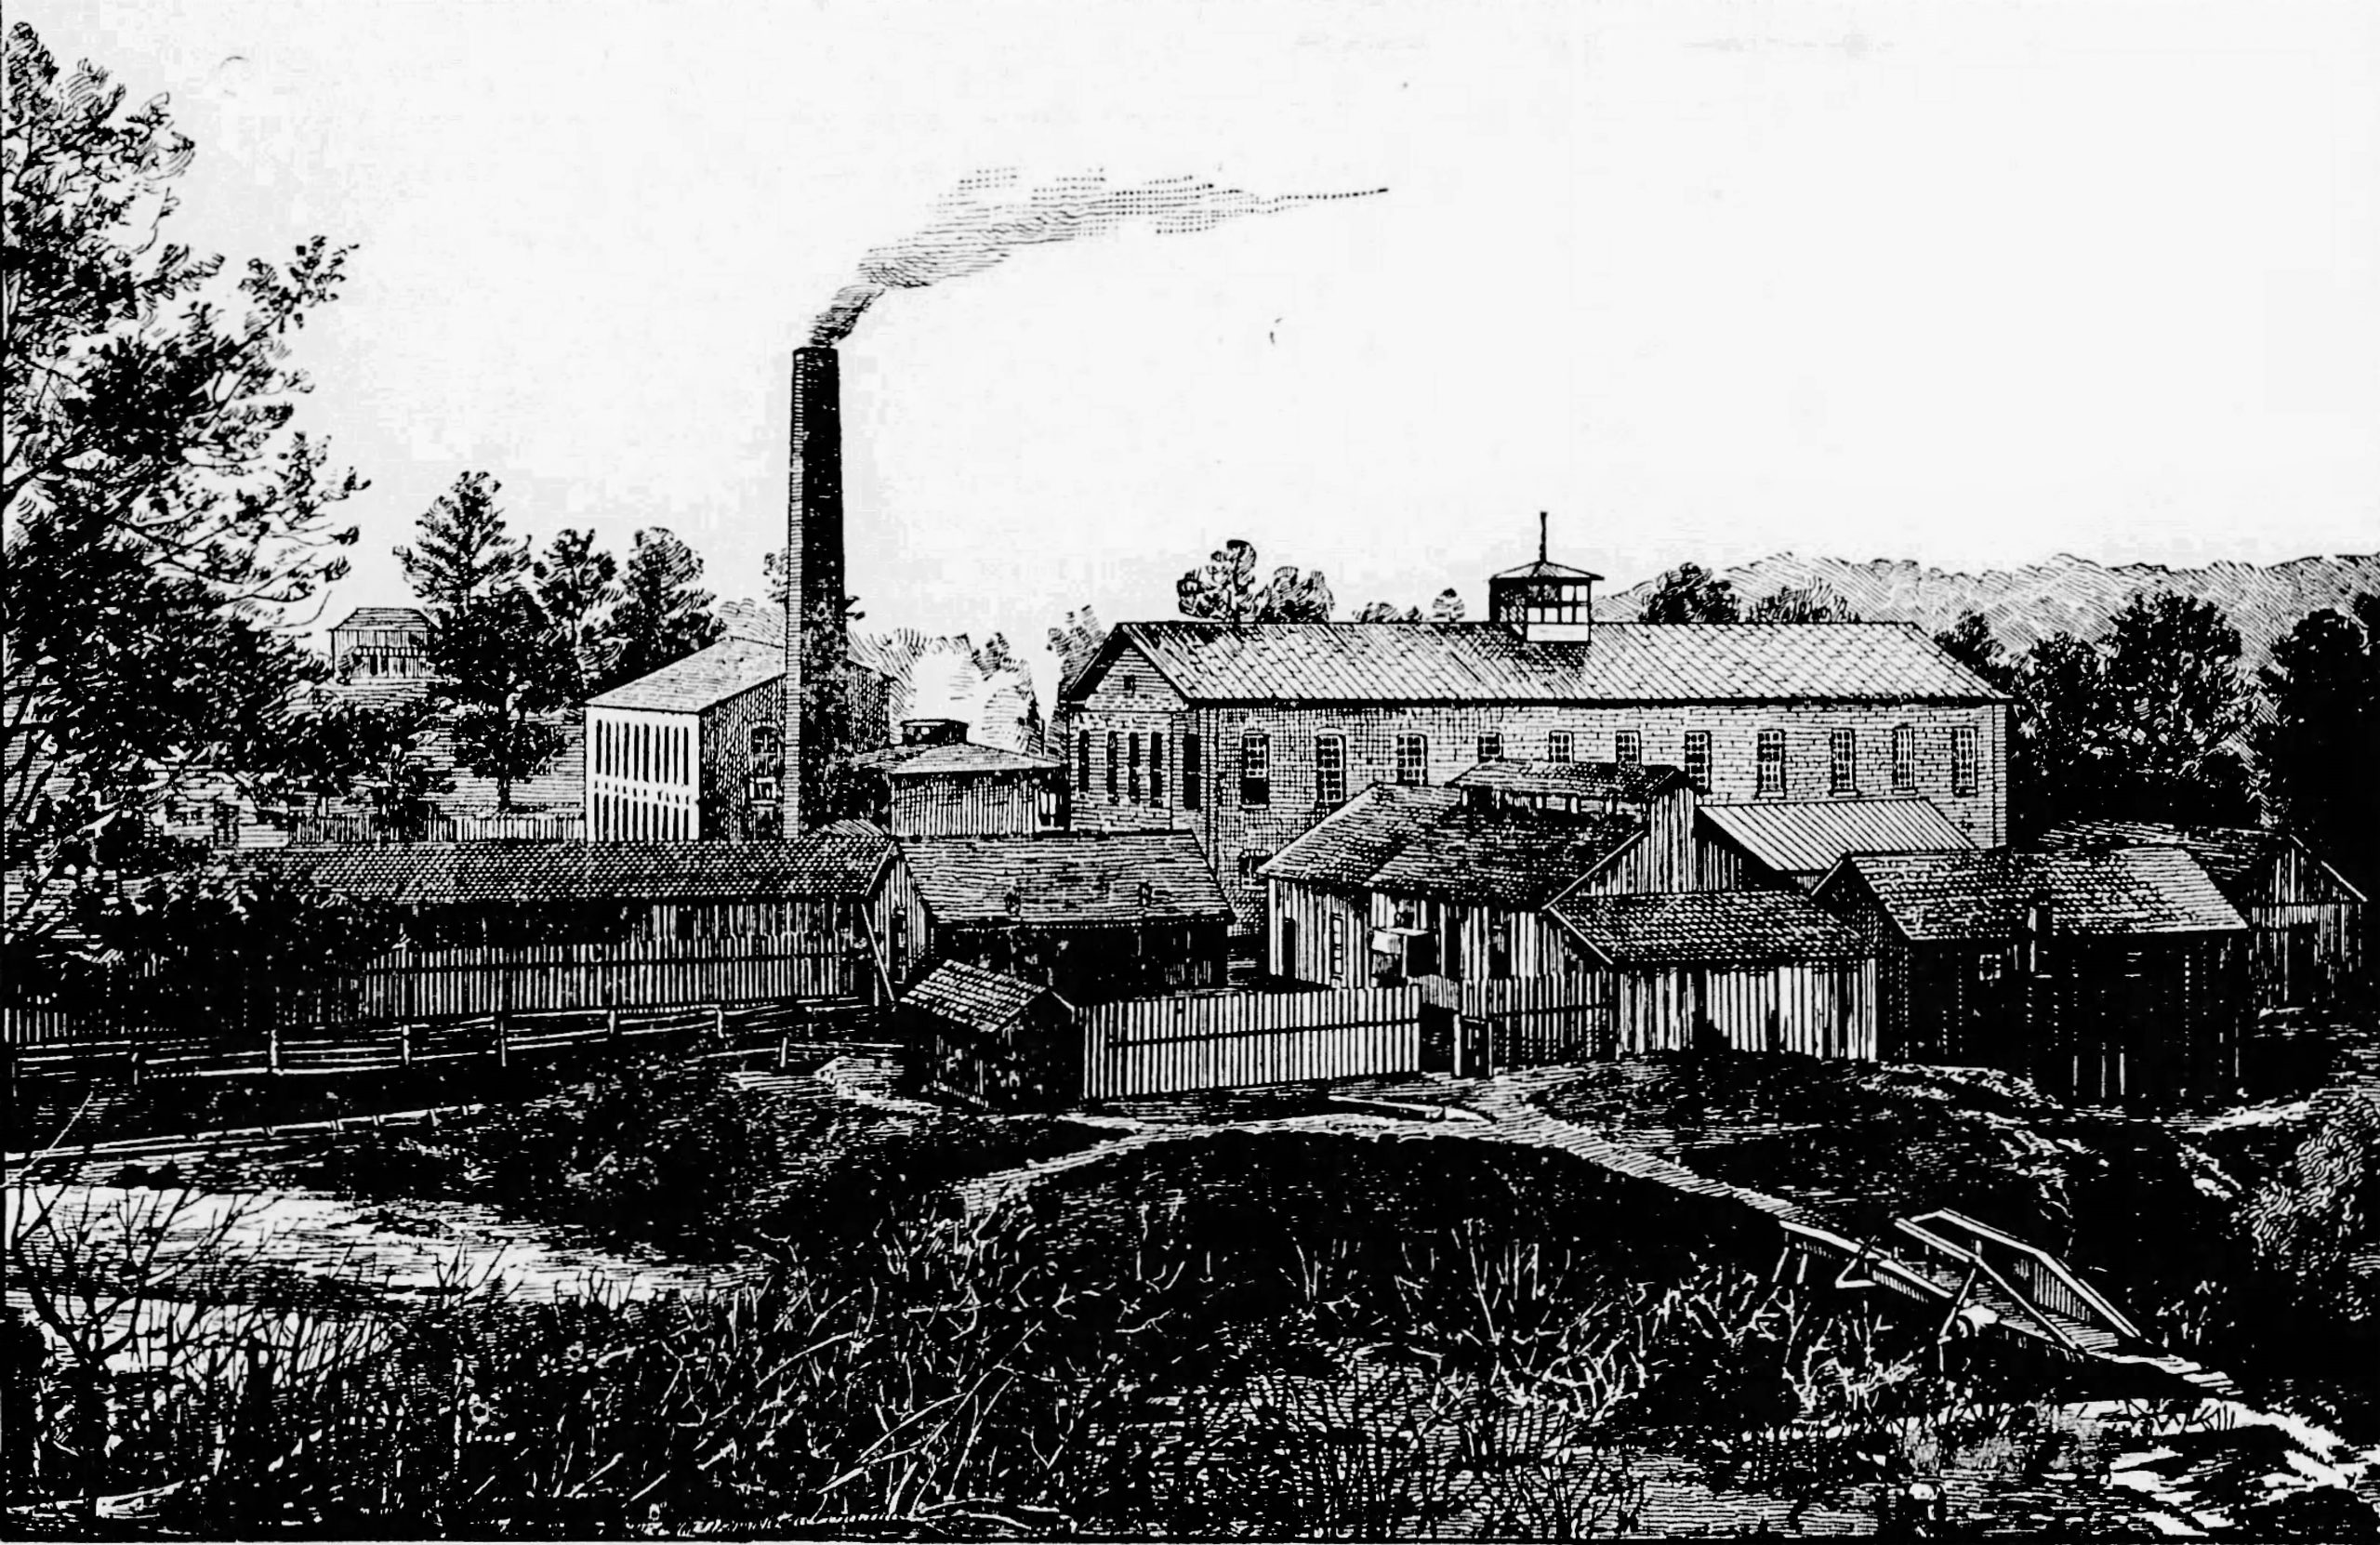 PATRON + Tuscaloosa had a booming cottonseed industry in Tuscaloosa in 1899